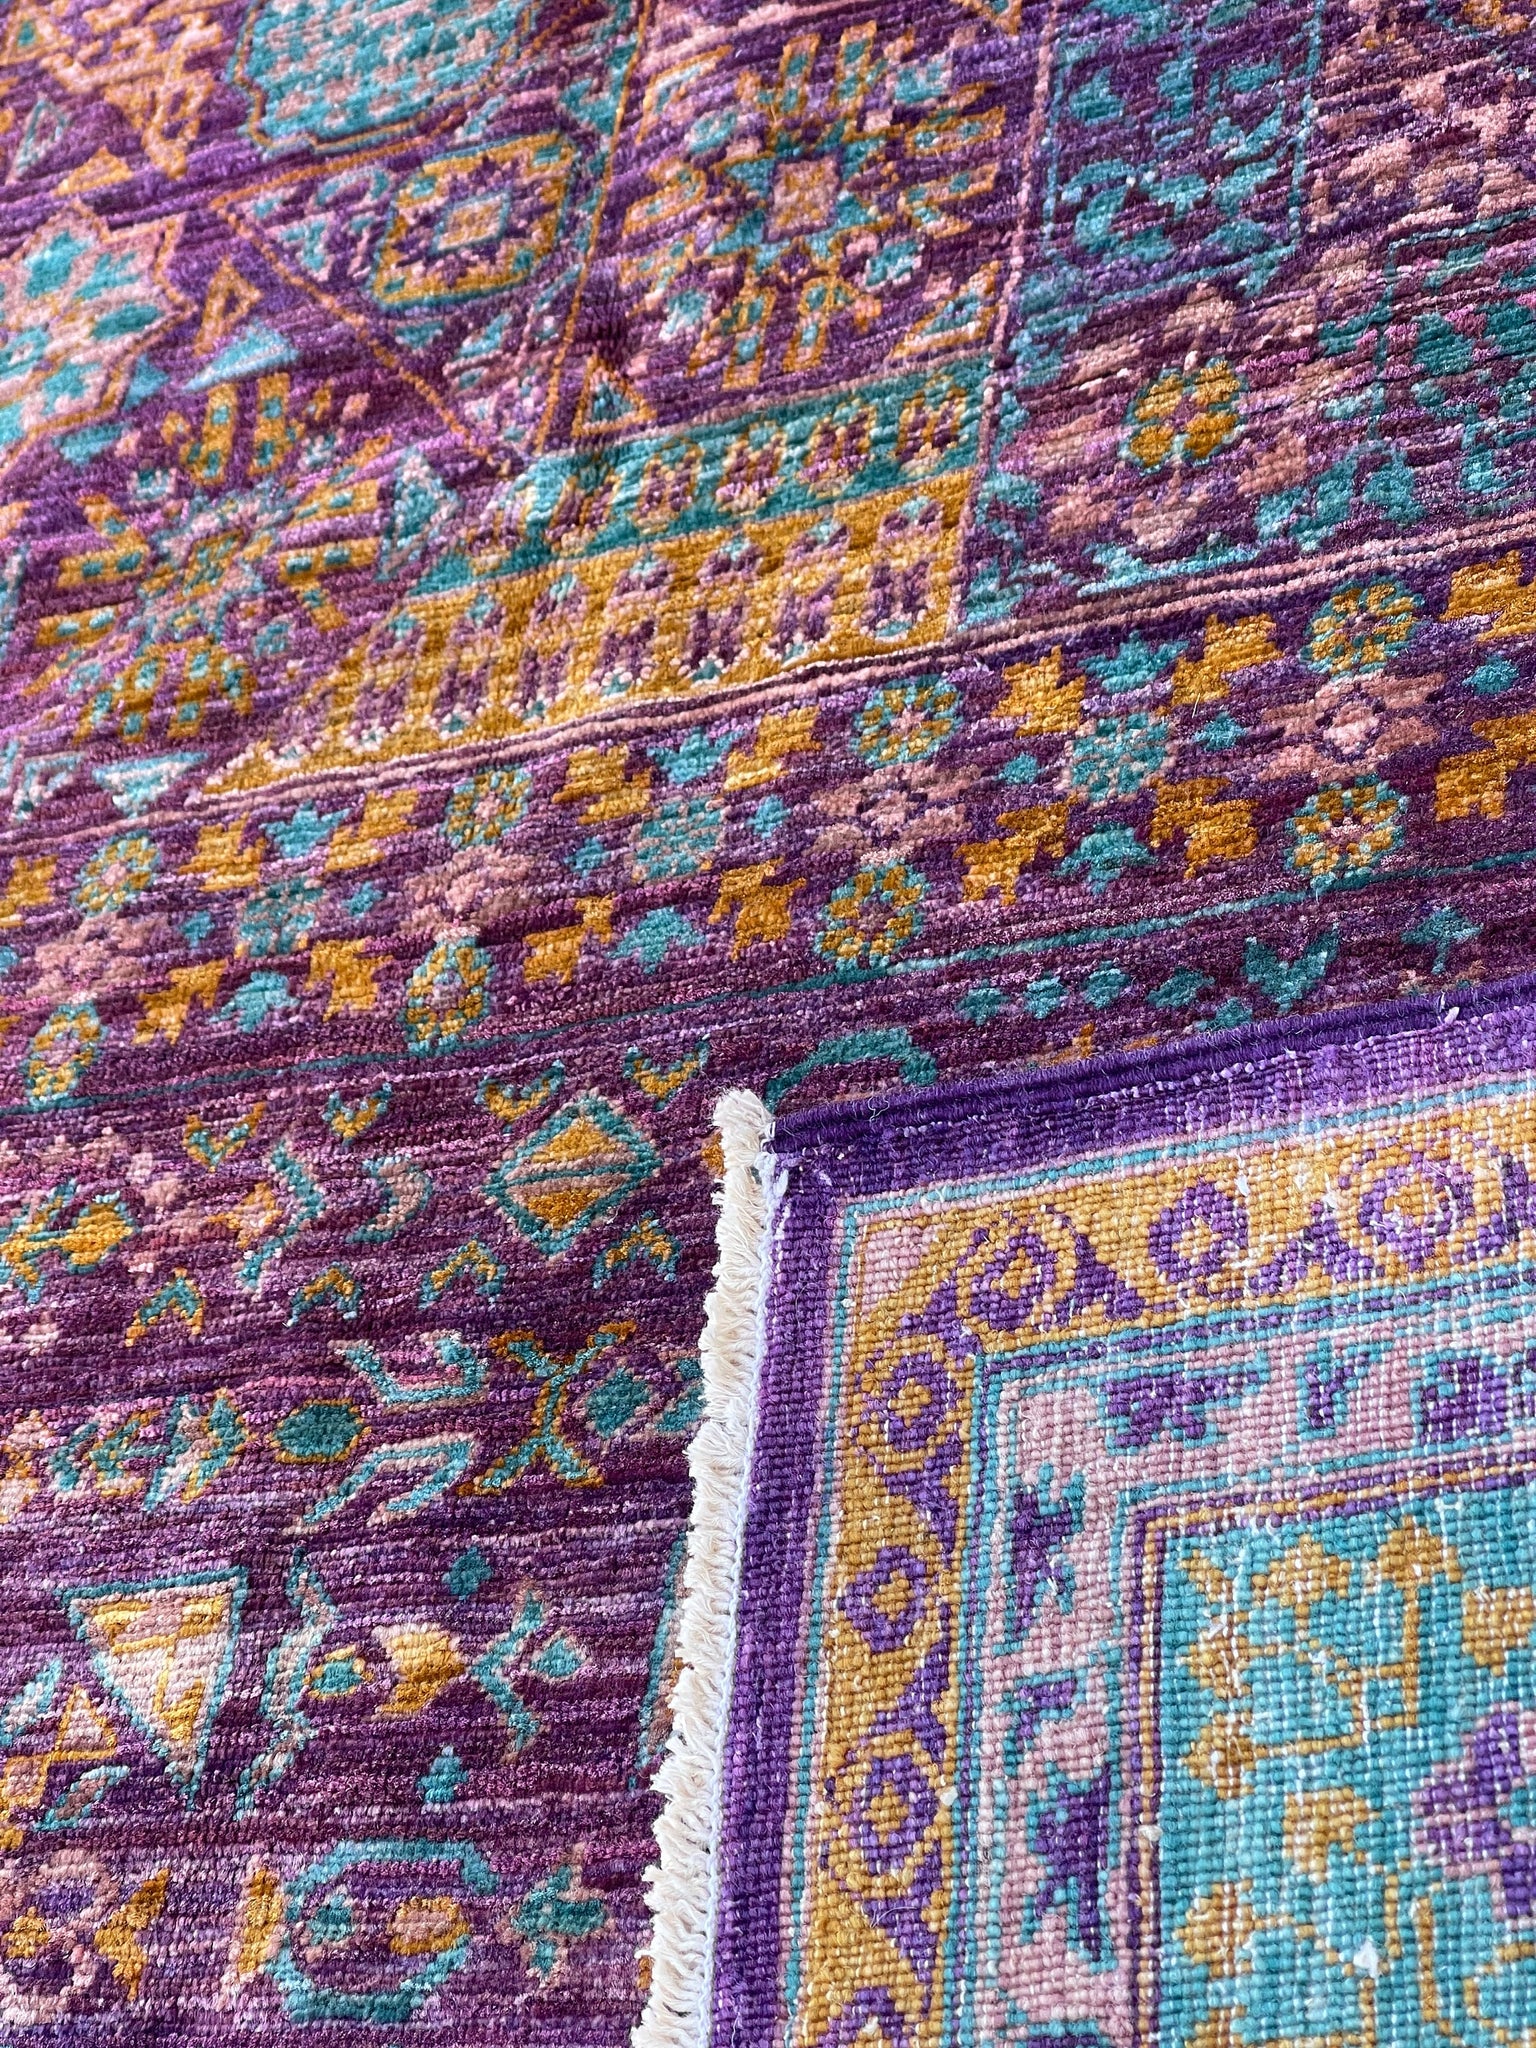 9x12 Authentic Hand-Knotted Afghan Rug | Purple Green Yellow-Gold Teal Lavender Handmade Wool Afghan Rug | Mamluk Wool Traditional Medallion